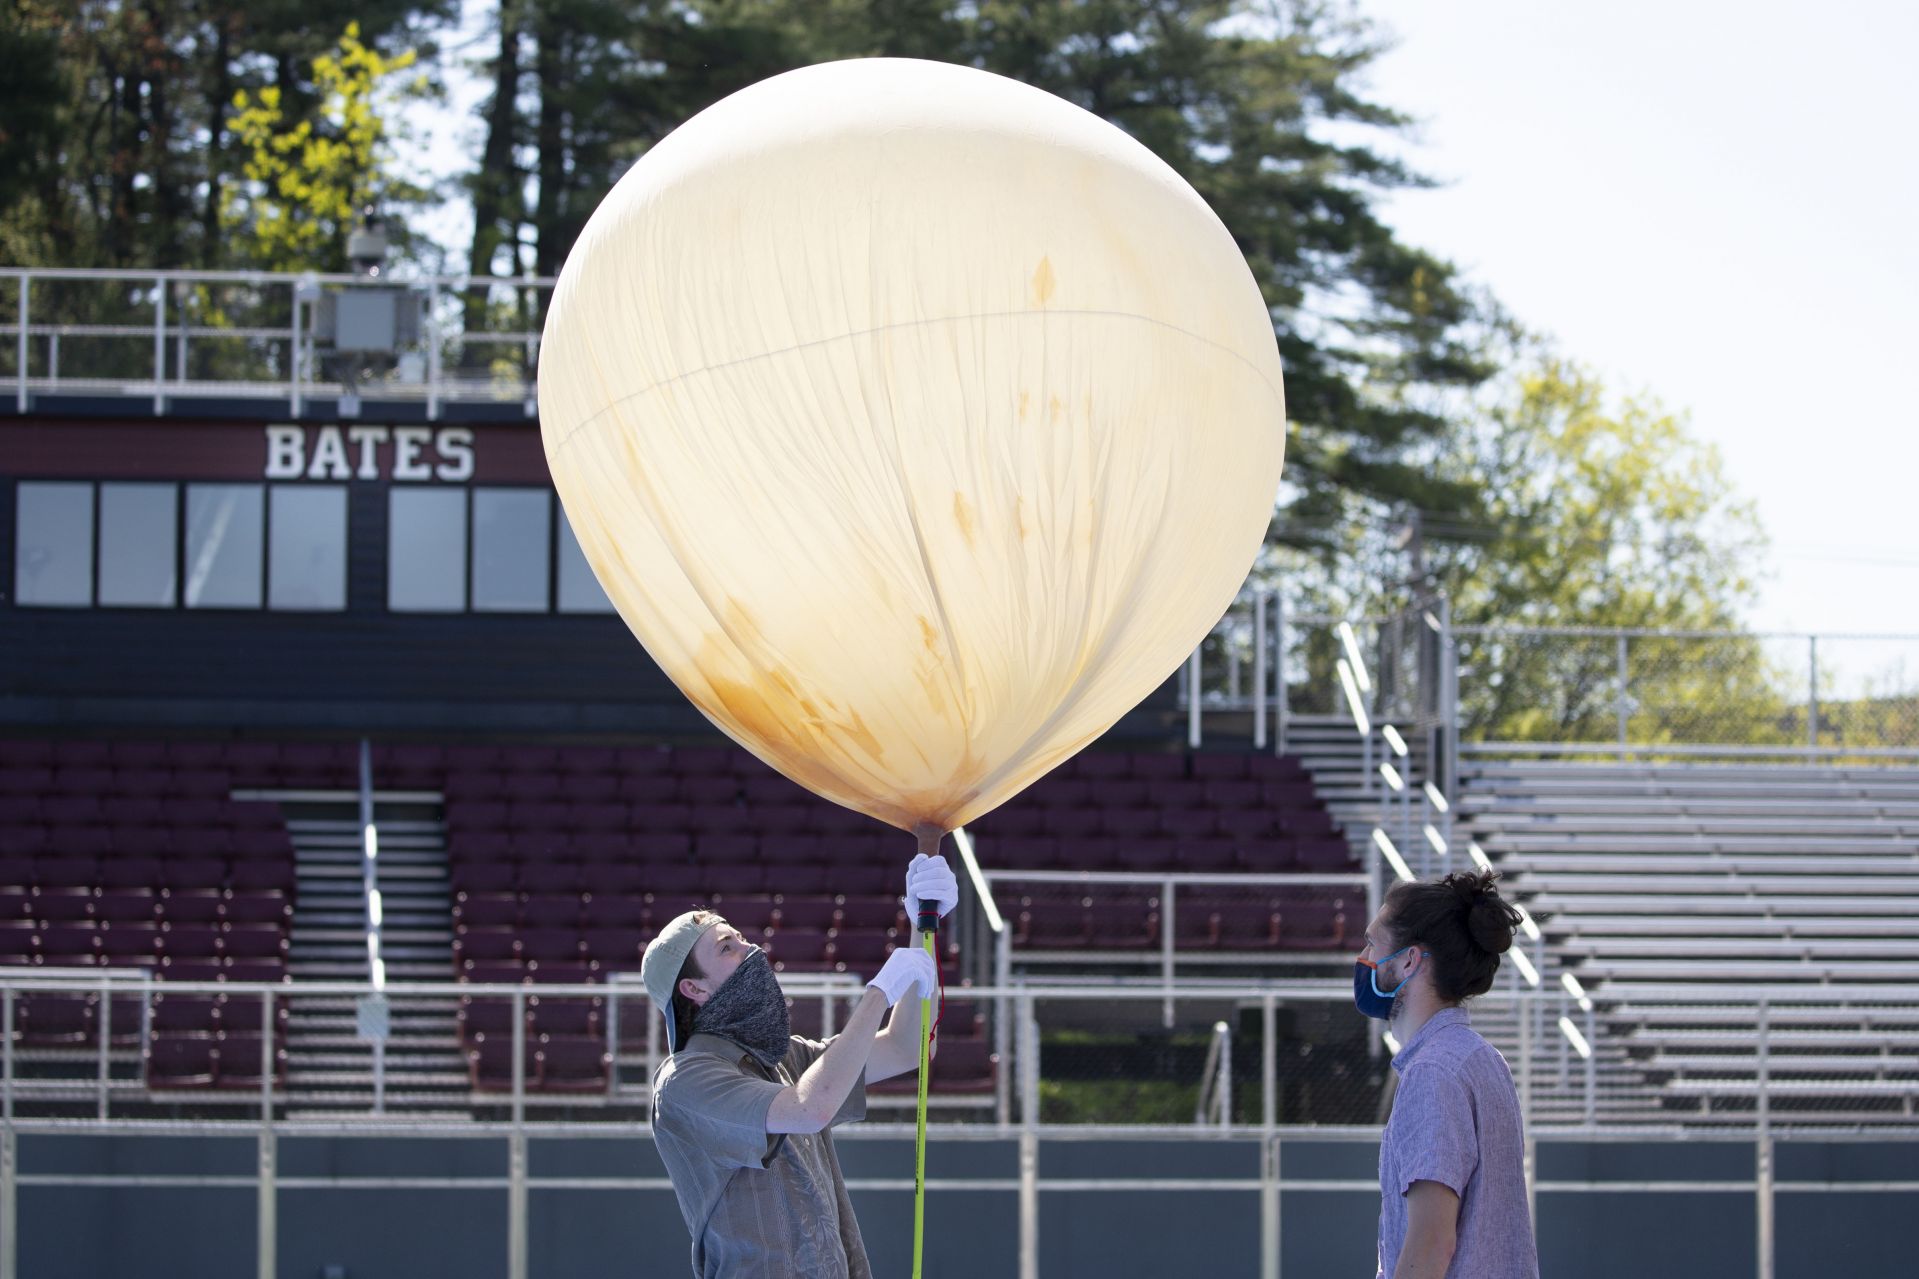 Donahue and Barker evaluate the balloon’s buoyancy after filling it with helium. (Phyllis Graber Jensen/Bates College)